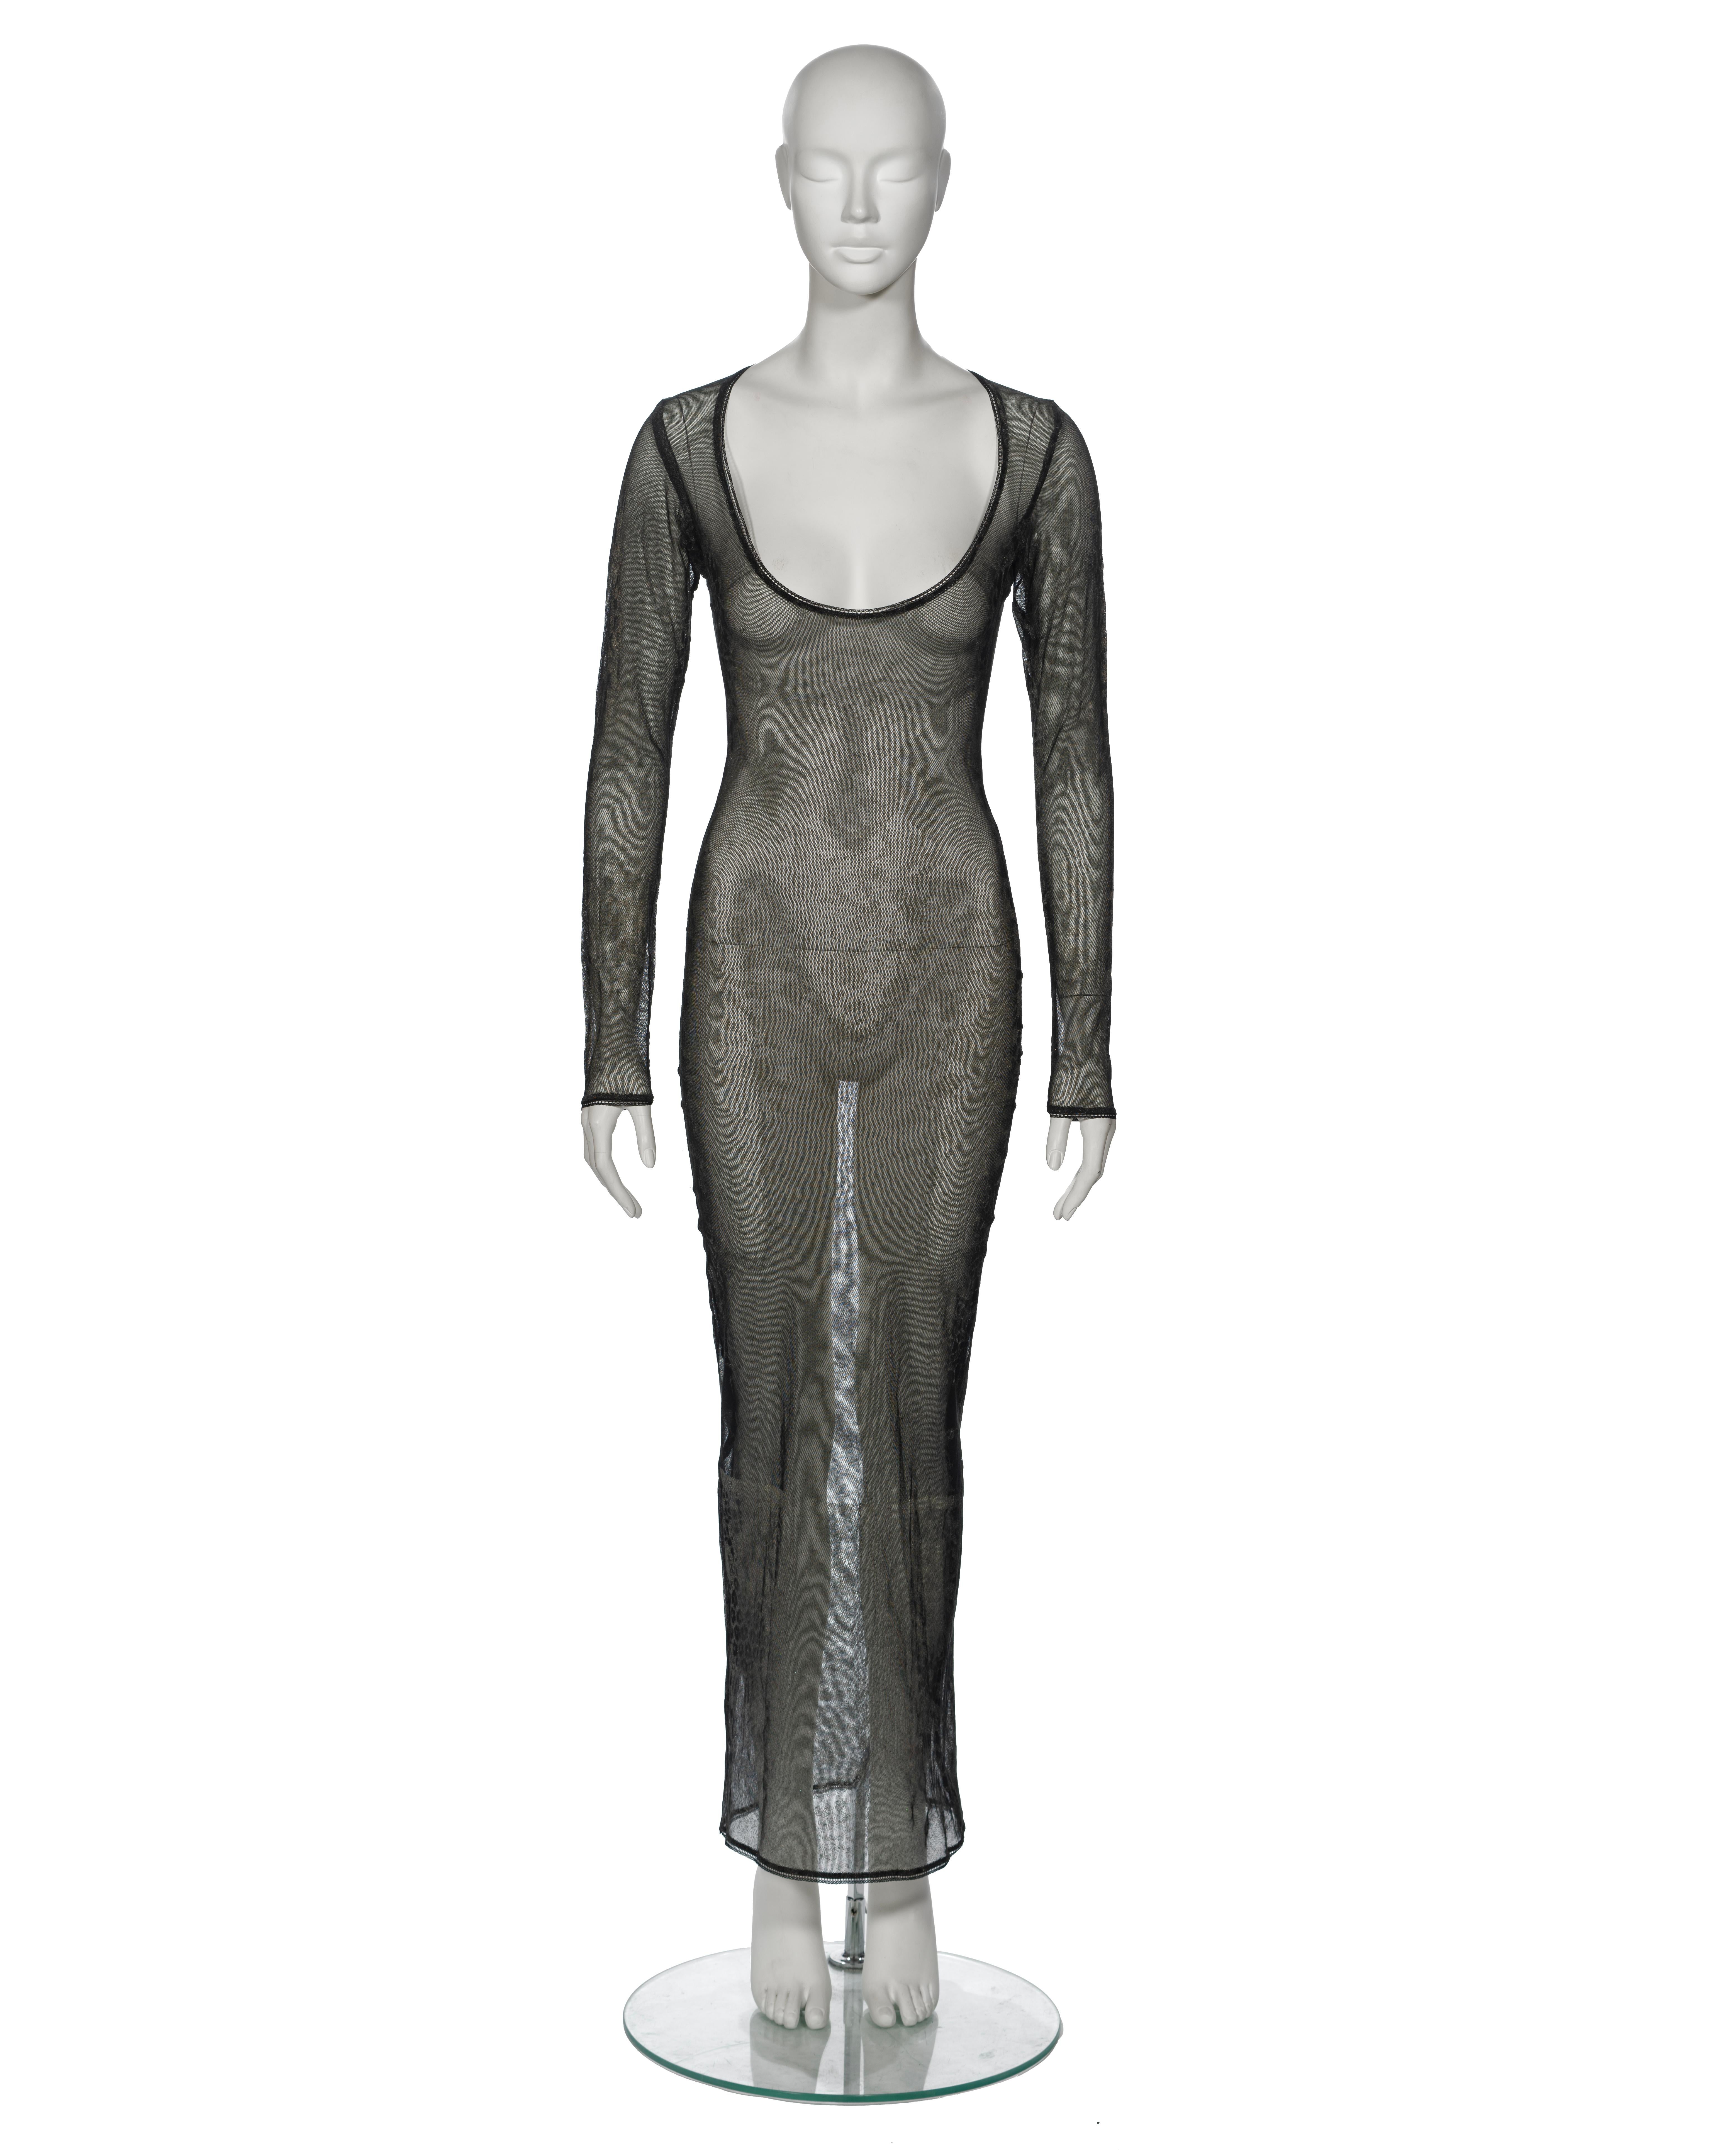 ▪ Archival Vivienne Westwood Evening Dress
▪ Fall-Winter 1992
▪ Sold by One of a Kind Archive
▪ Crafted from a sheer stretch cotton mesh
▪ Features a glitter-printed 17th-century tape lace motif, designed to evoke an antique aesthetic
▪ Showcases a